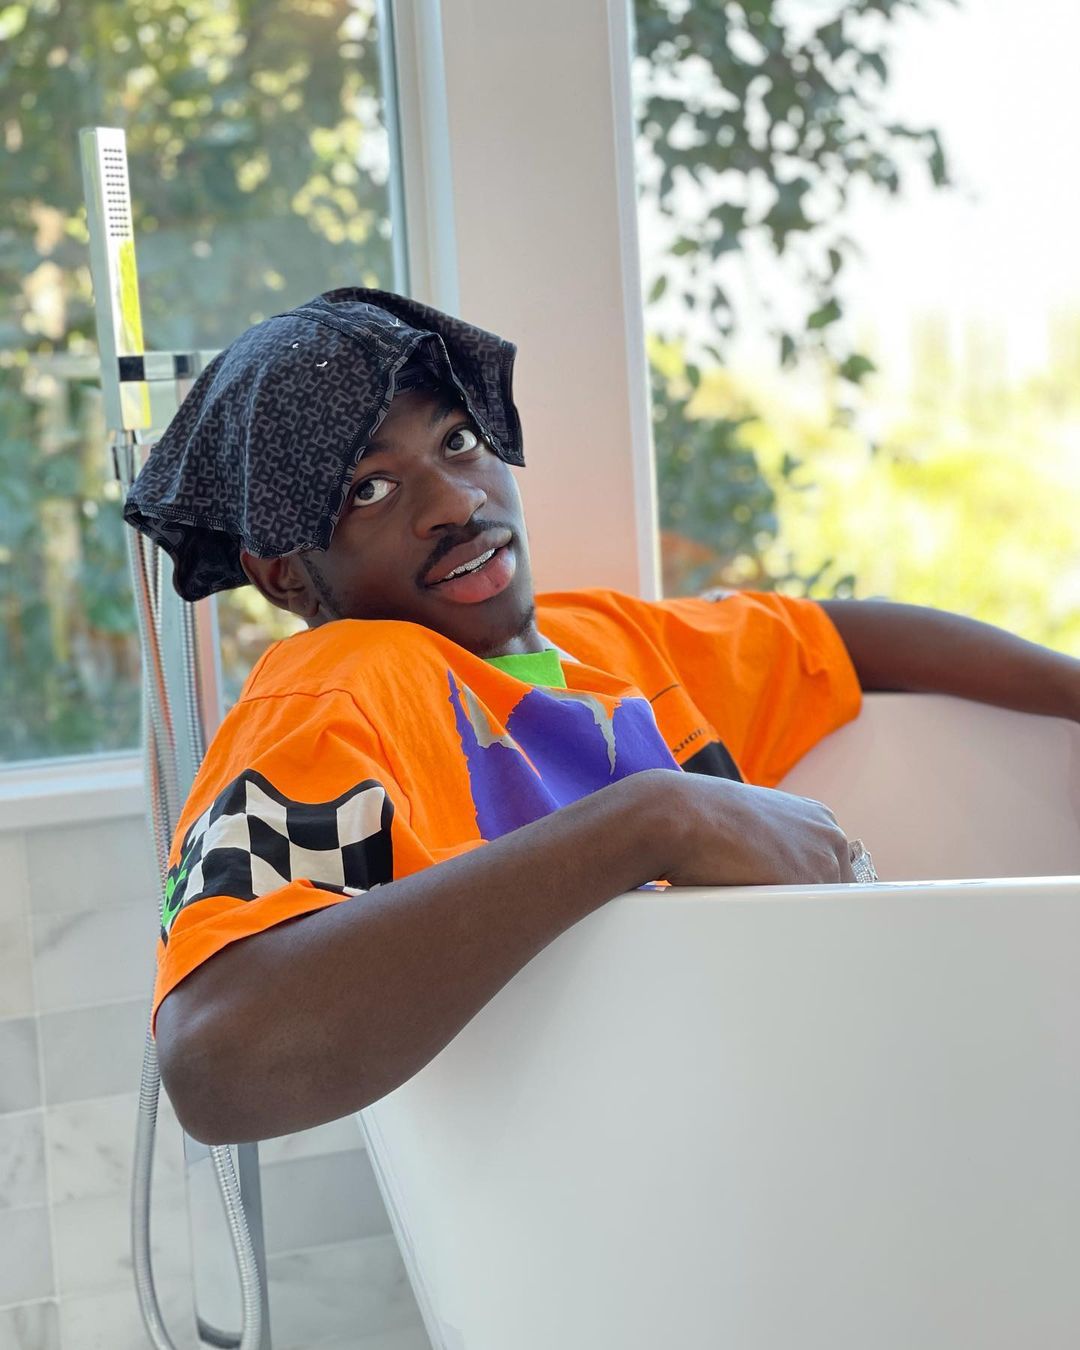 Lil Nas X buys a new home 3/5/21